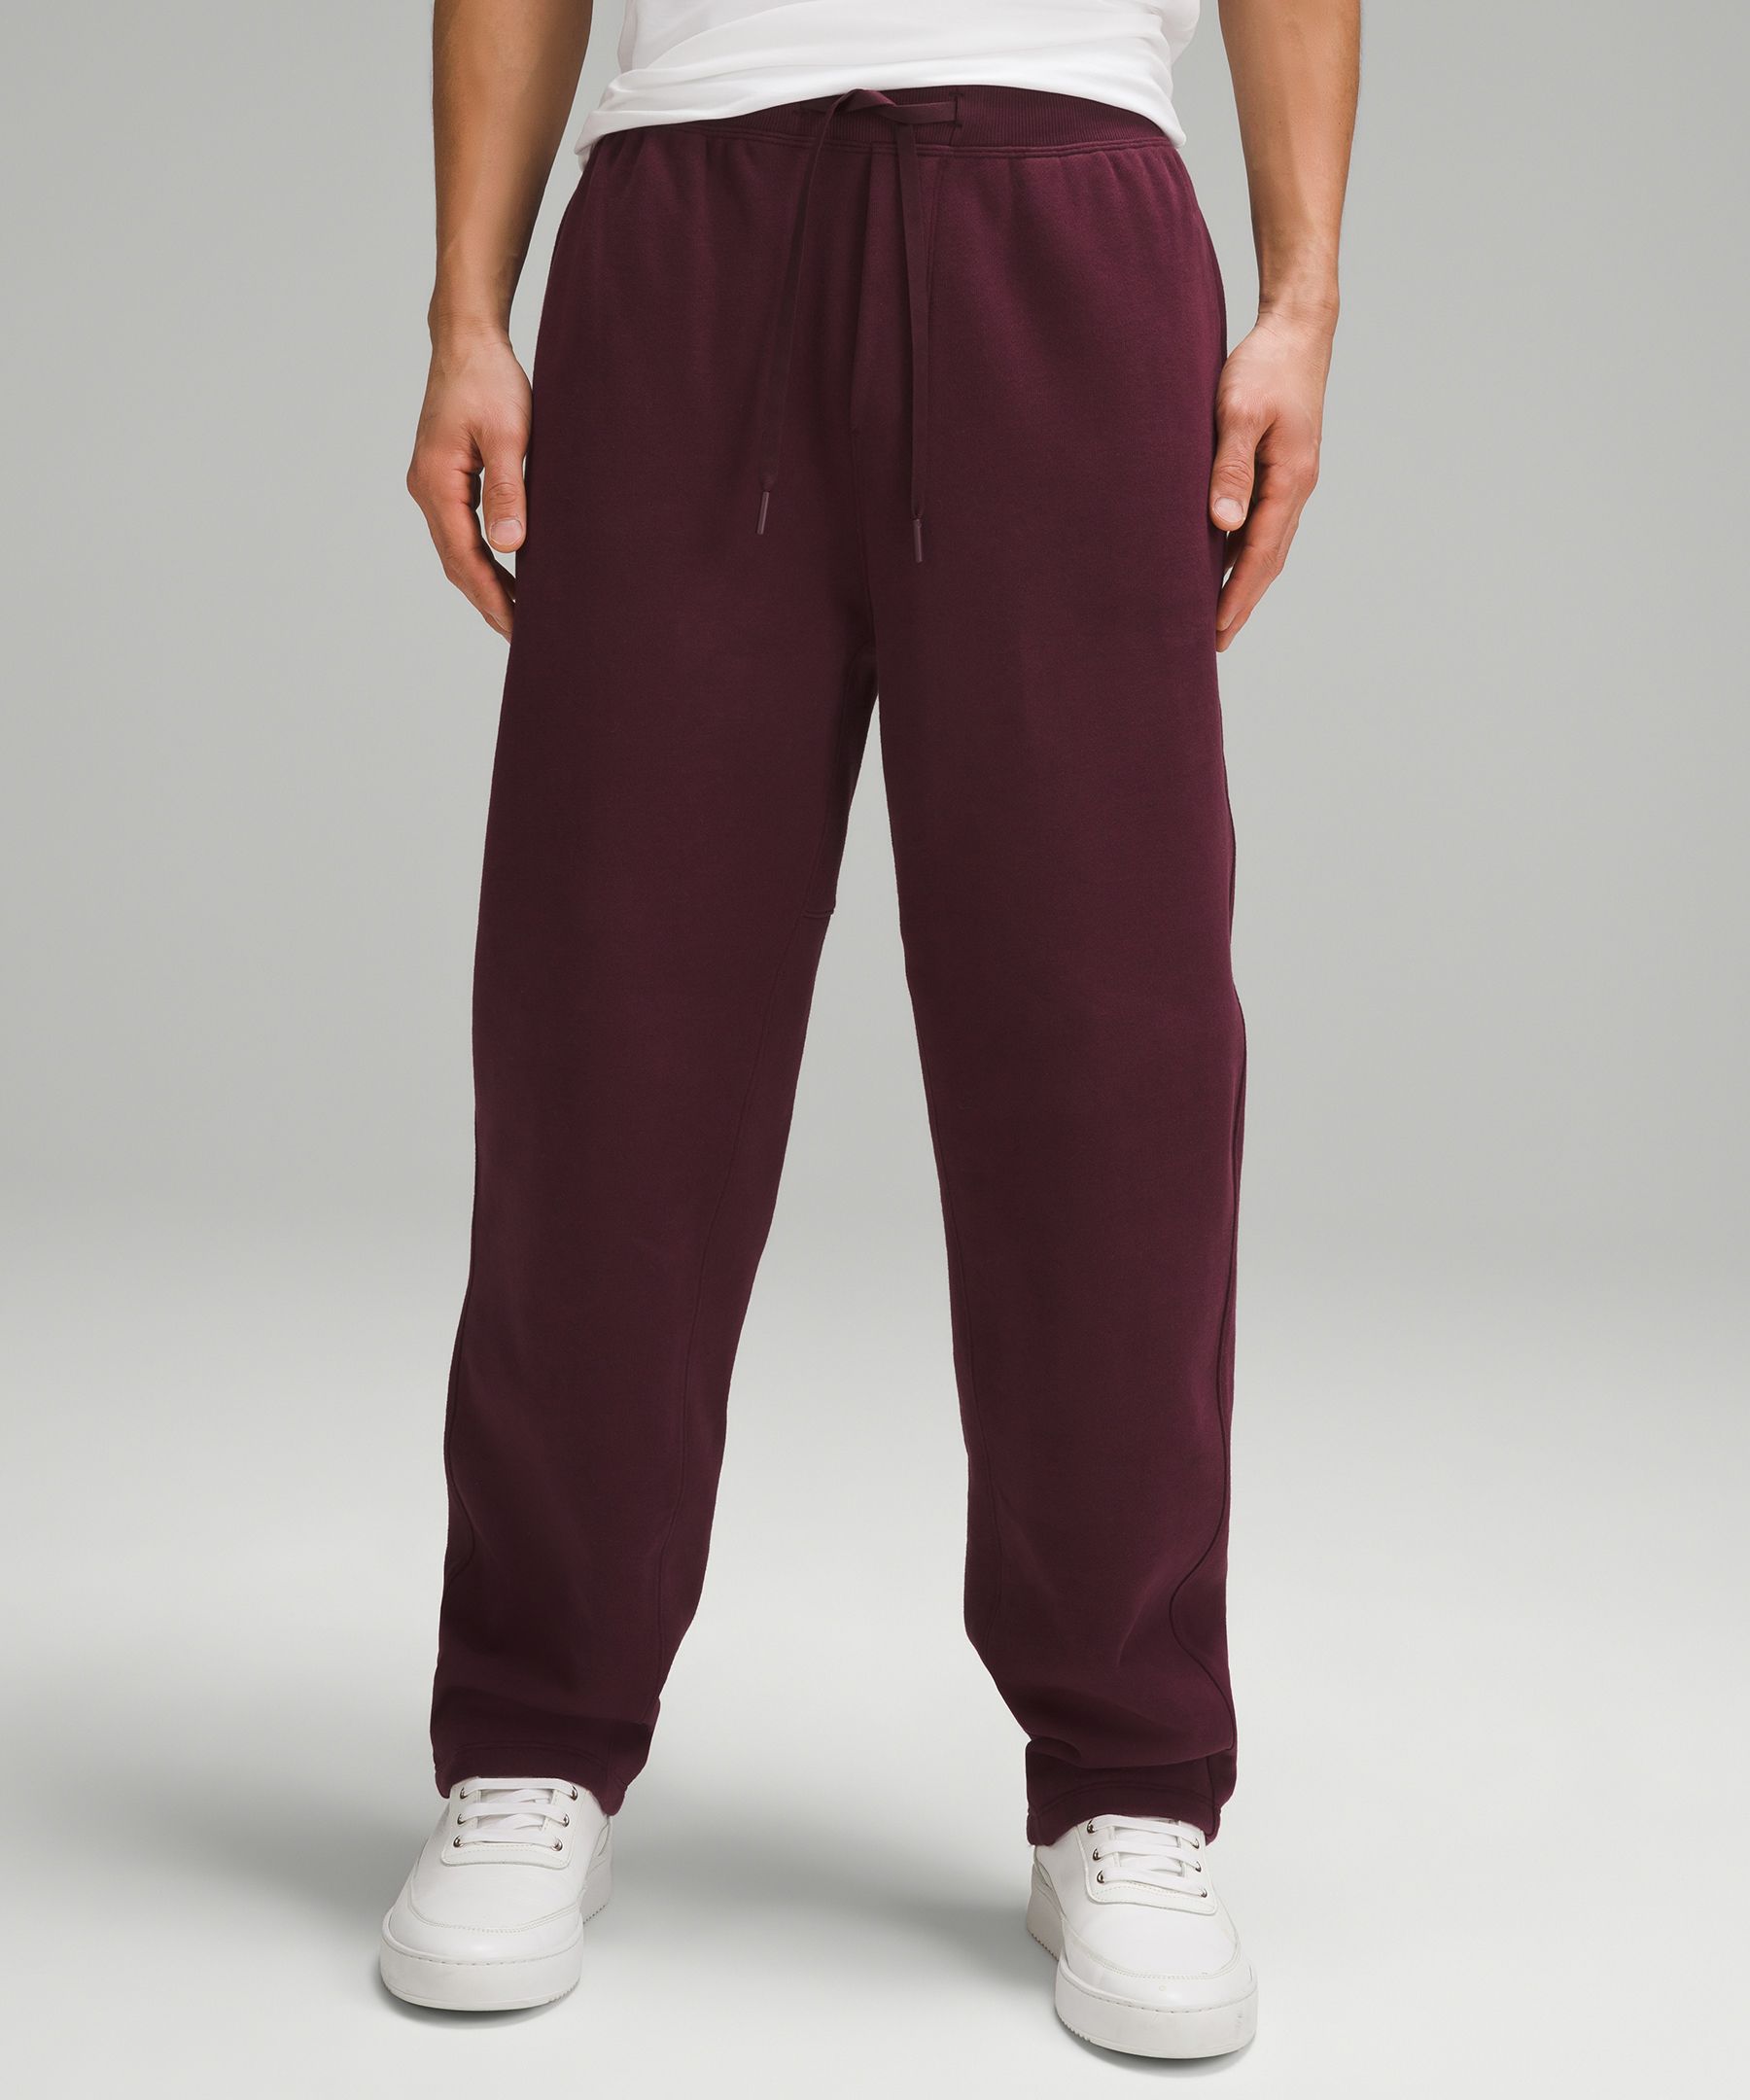 Lunar New Year Steady State Pant